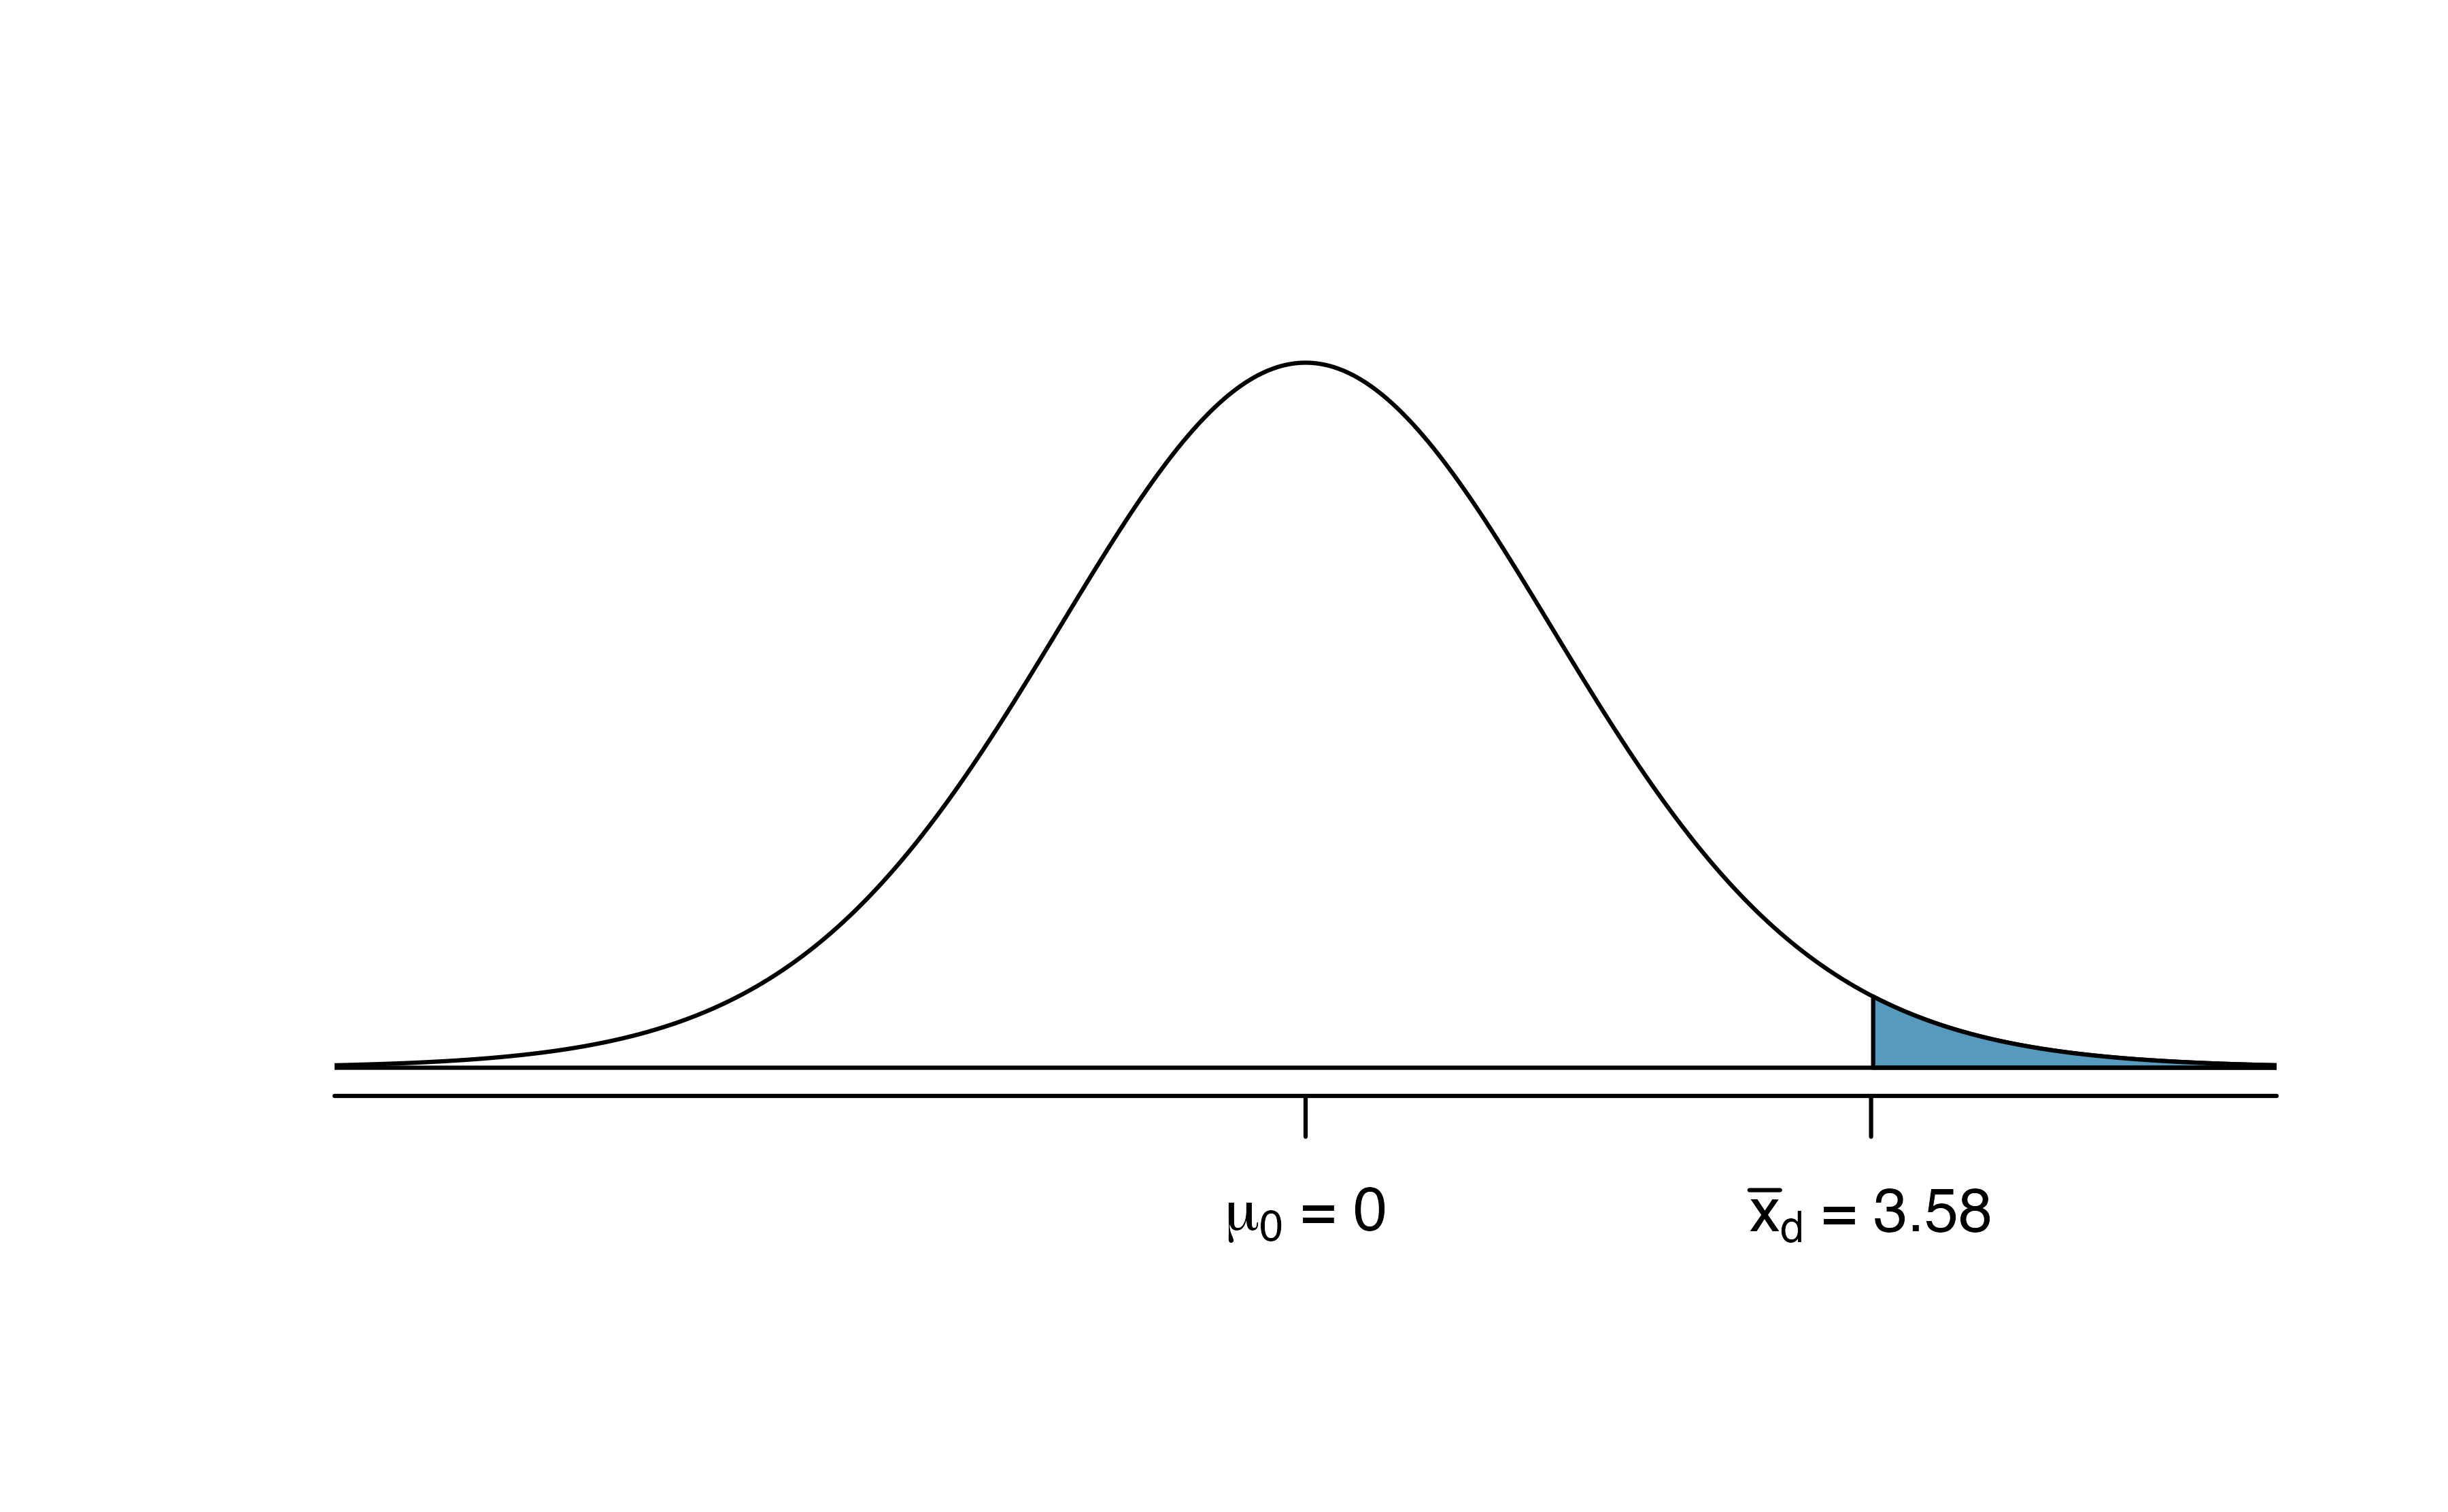 Distribution of $\bar{x}_{d}$ under the null hypothesis of no difference.  The observed average difference of 2.98 is marked with the shaded areas more extreme than the observed difference given as the p-value.